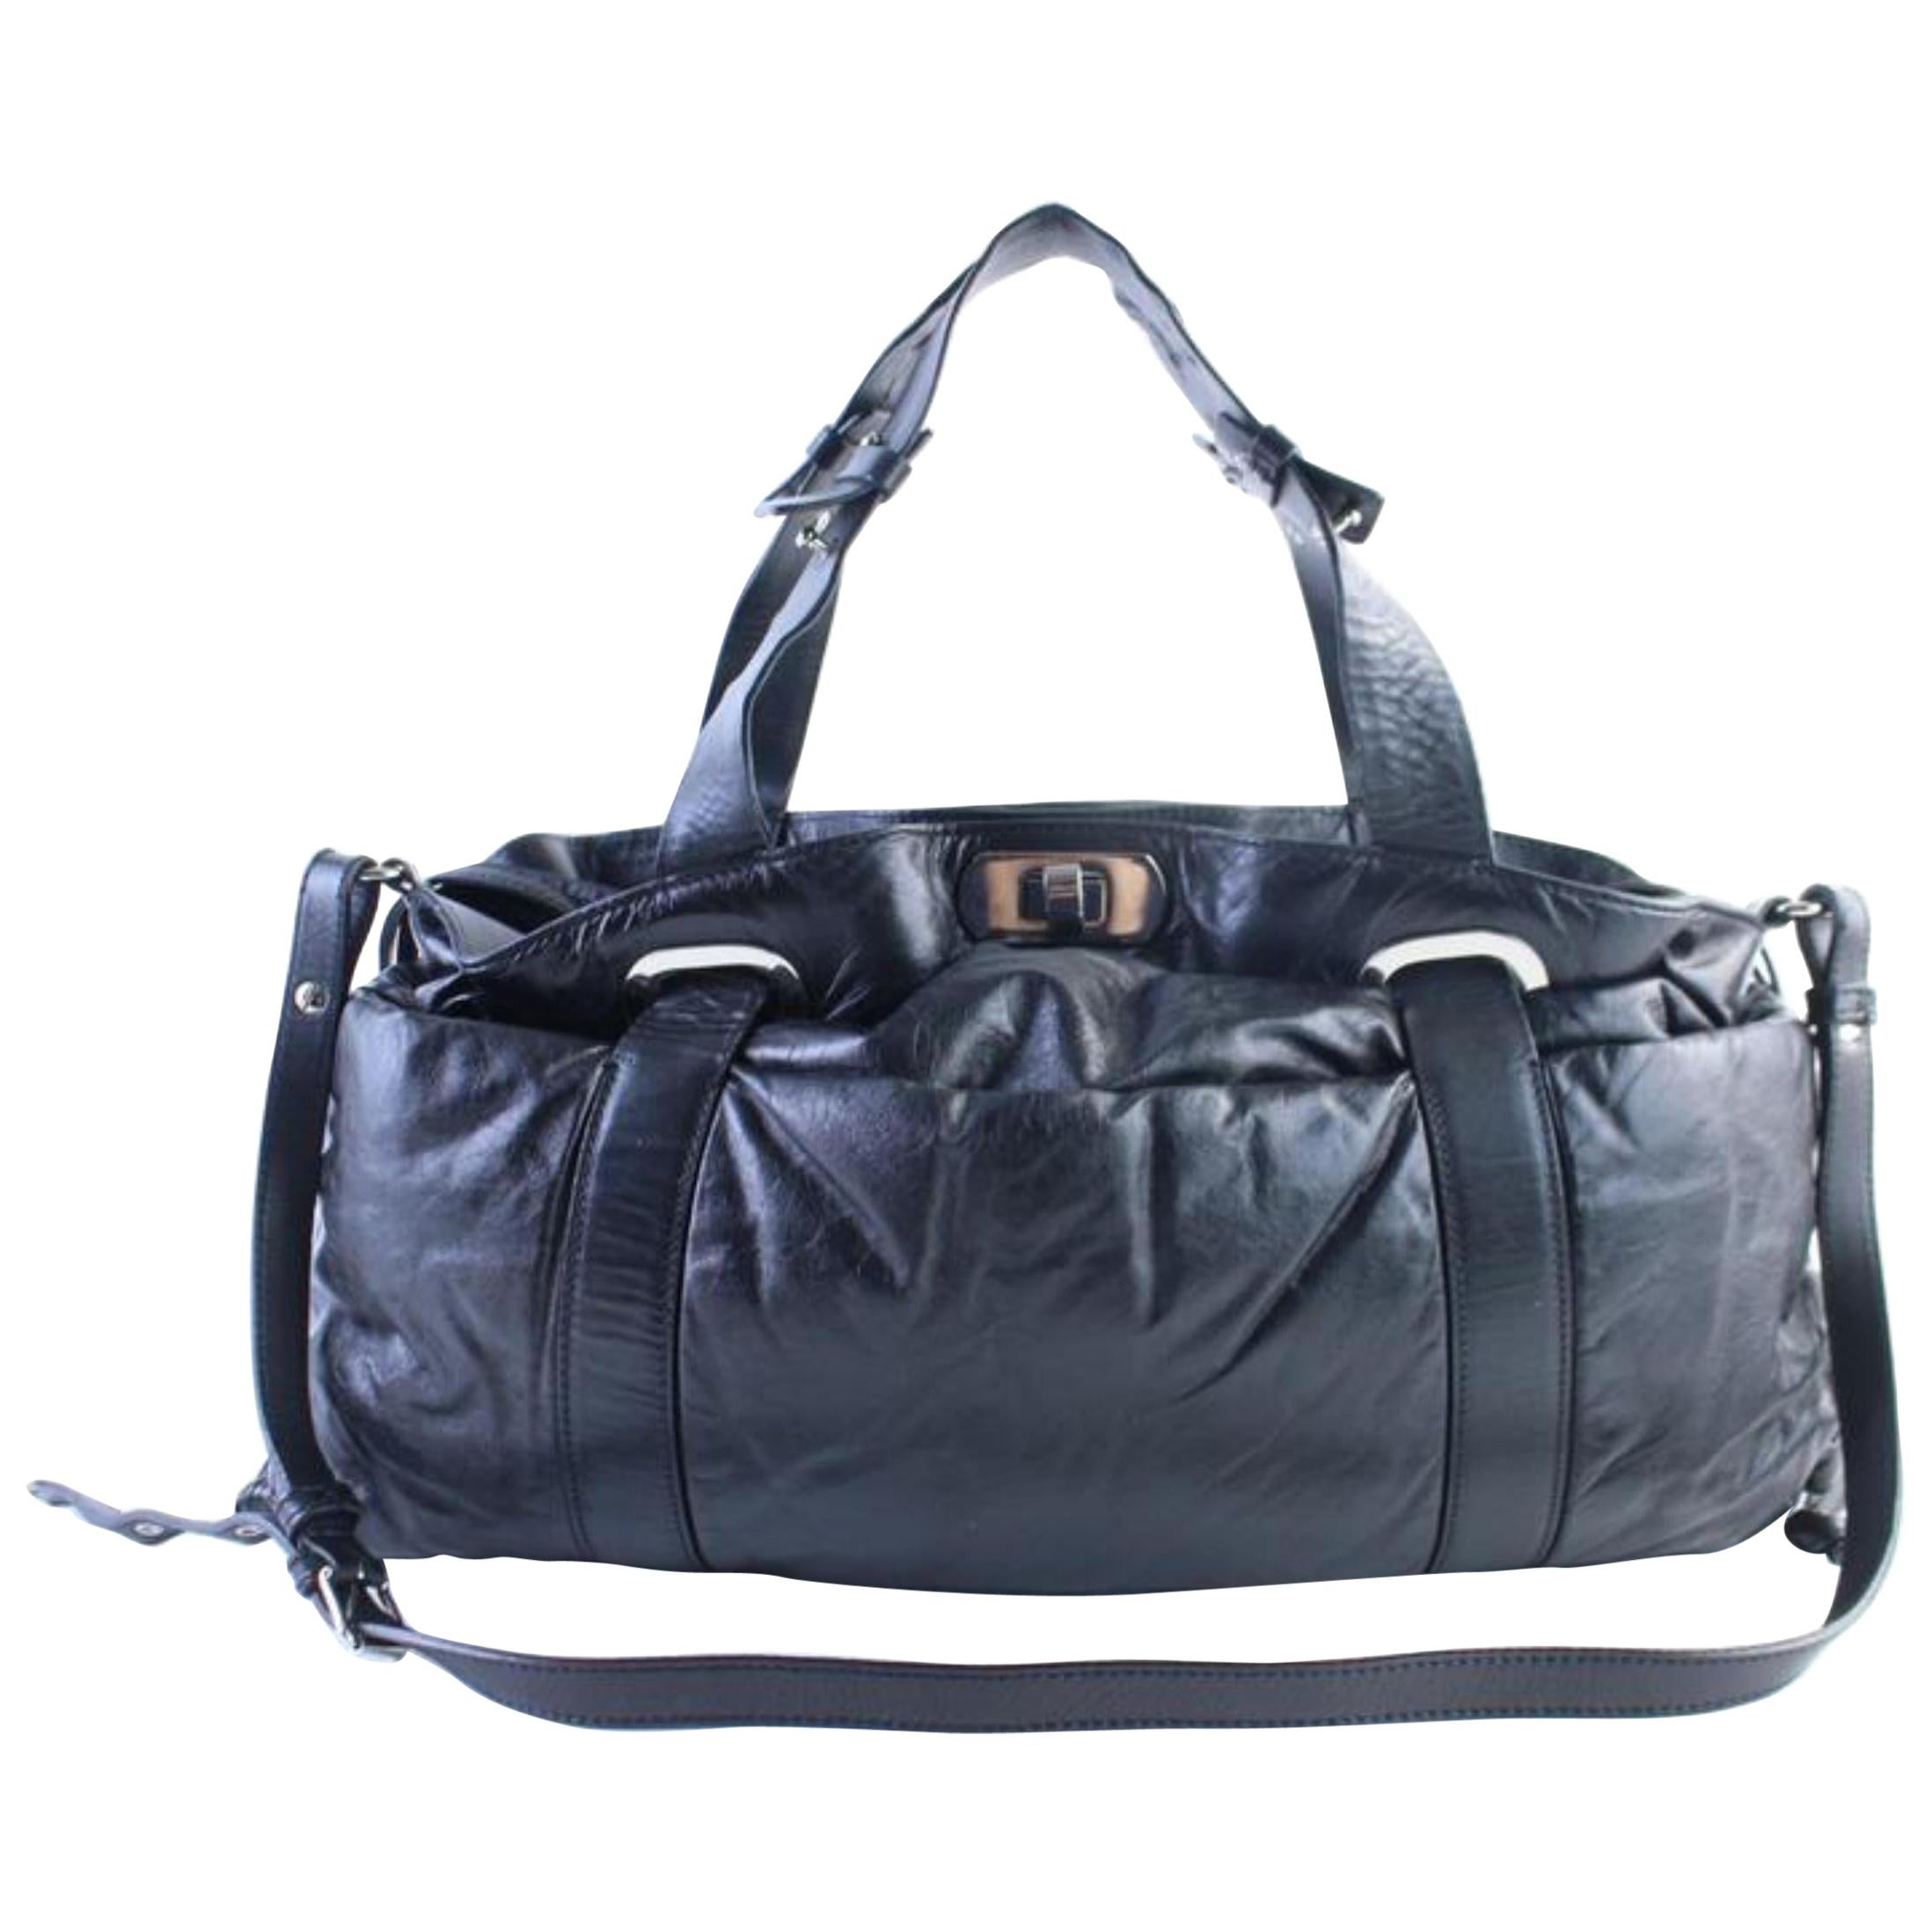 Marni Duffle Boston 2way with Strap 30mr0703 Black Leather Weekend/Travel Bag For Sale